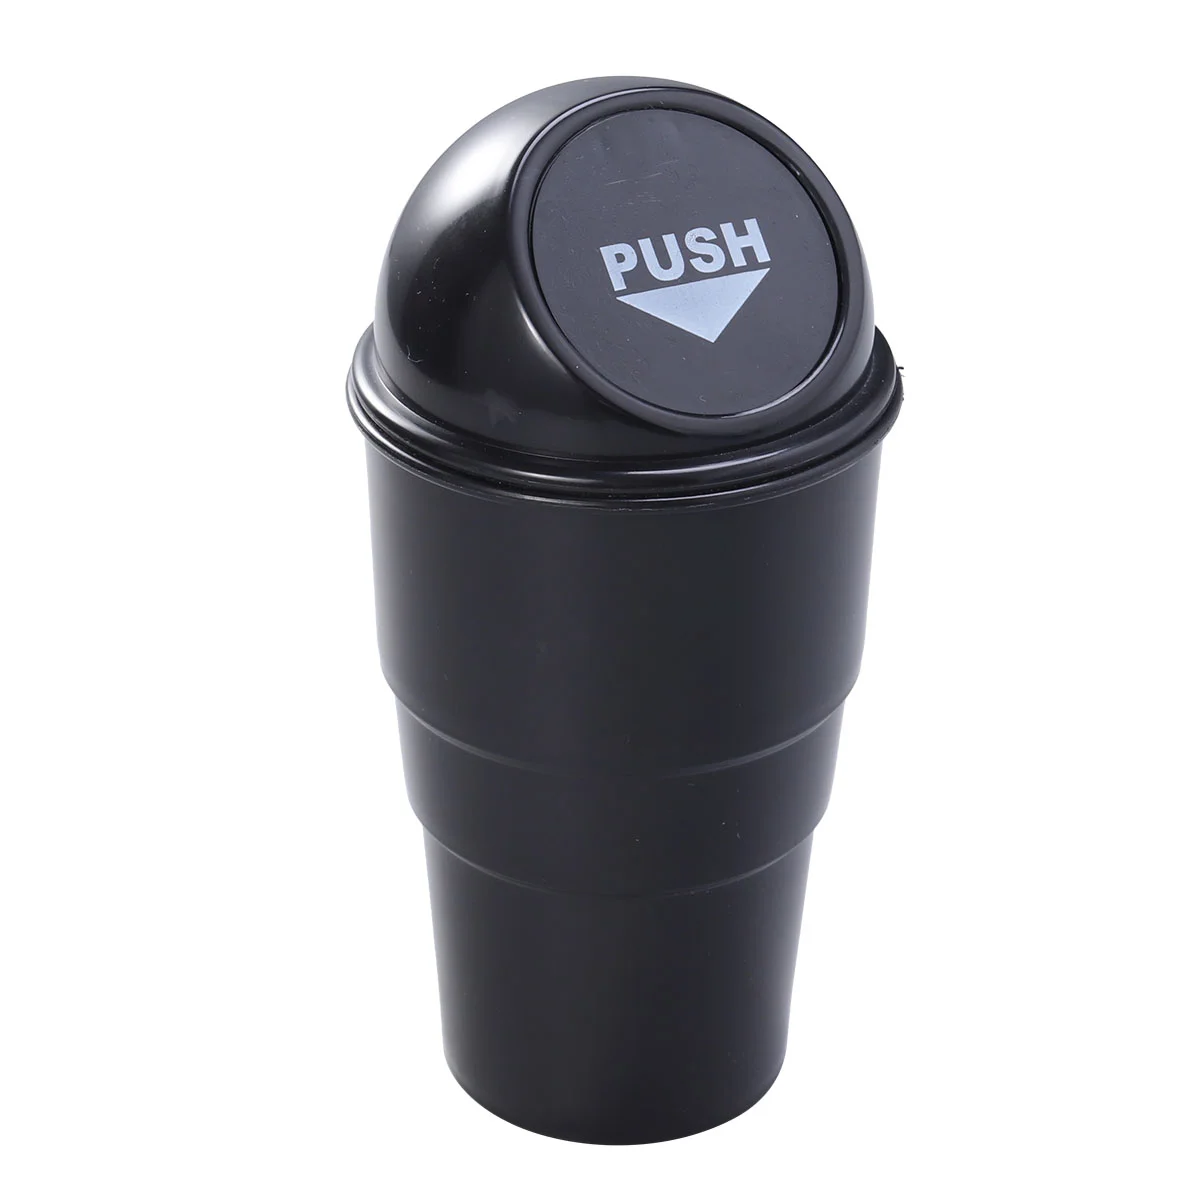 

Car Trash Can With Lid Garbage Dust Bin Storage Barrel Fits Cup Holder In Console Or Door (Black) For